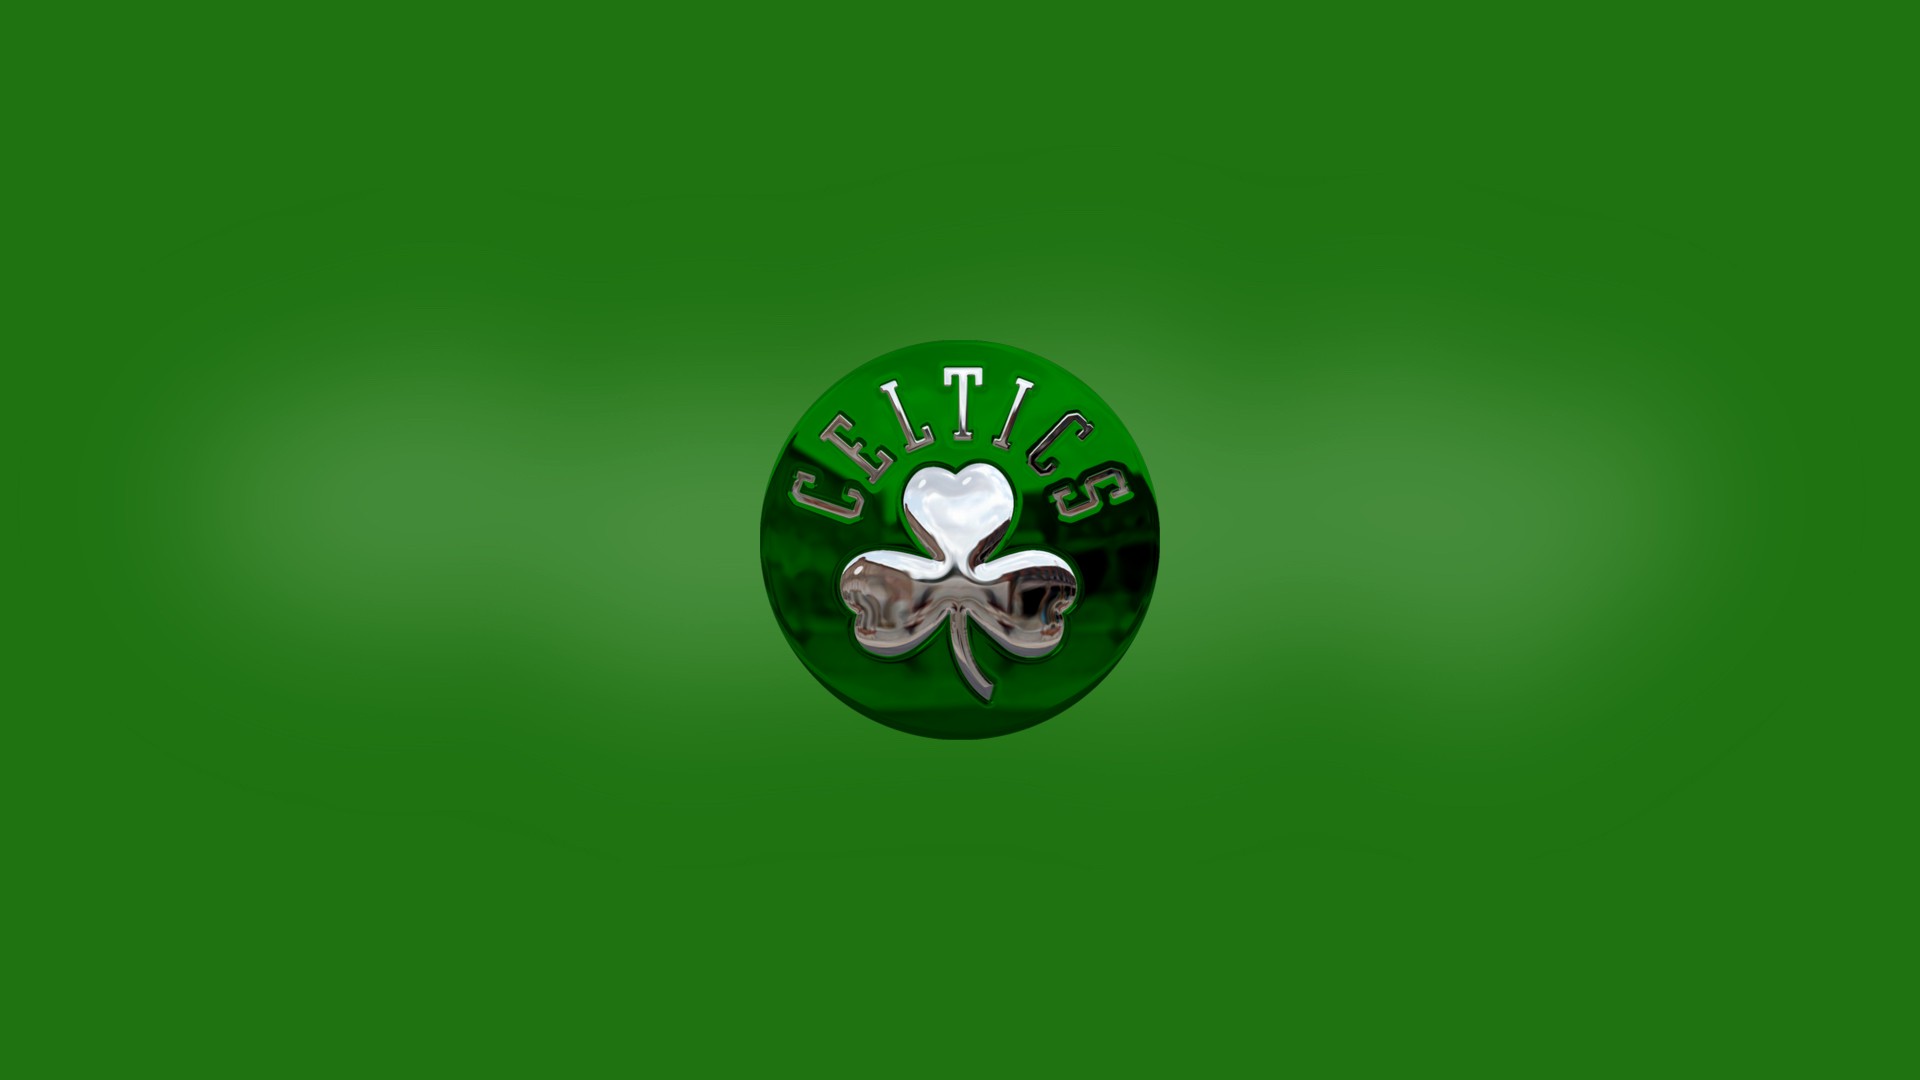 Boston Celtics HD Backgrounds with image resolution 1920x1080 pixel. You can make this wallpaper for your Desktop Computer Backgrounds, Mac Wallpapers, Android Lock screen or iPhone Screensavers